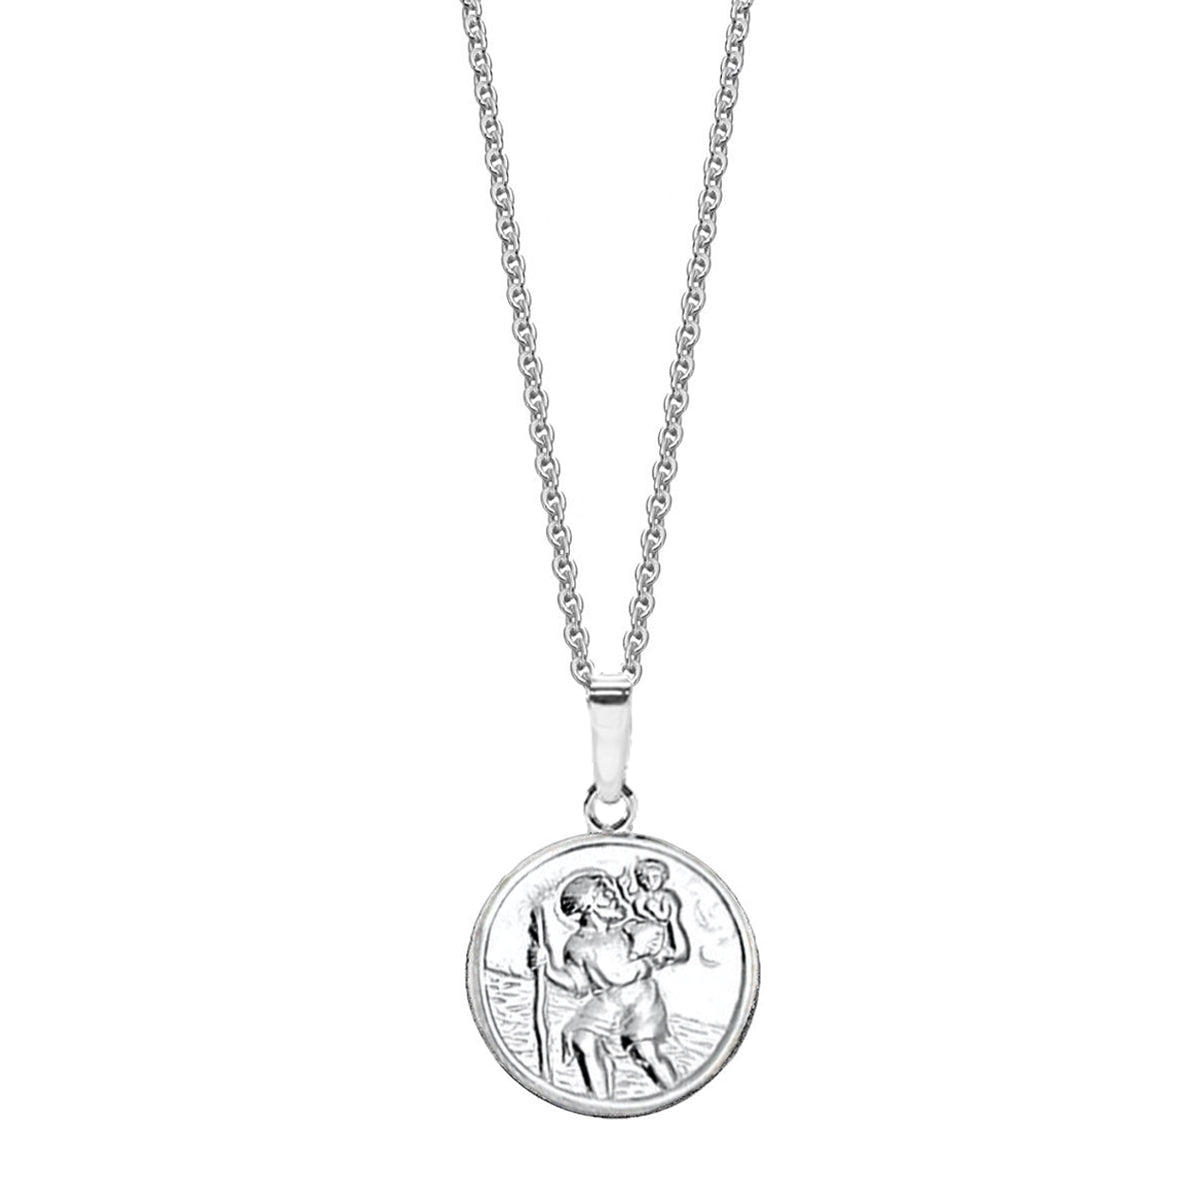 Silver St Christopher medal necklace 